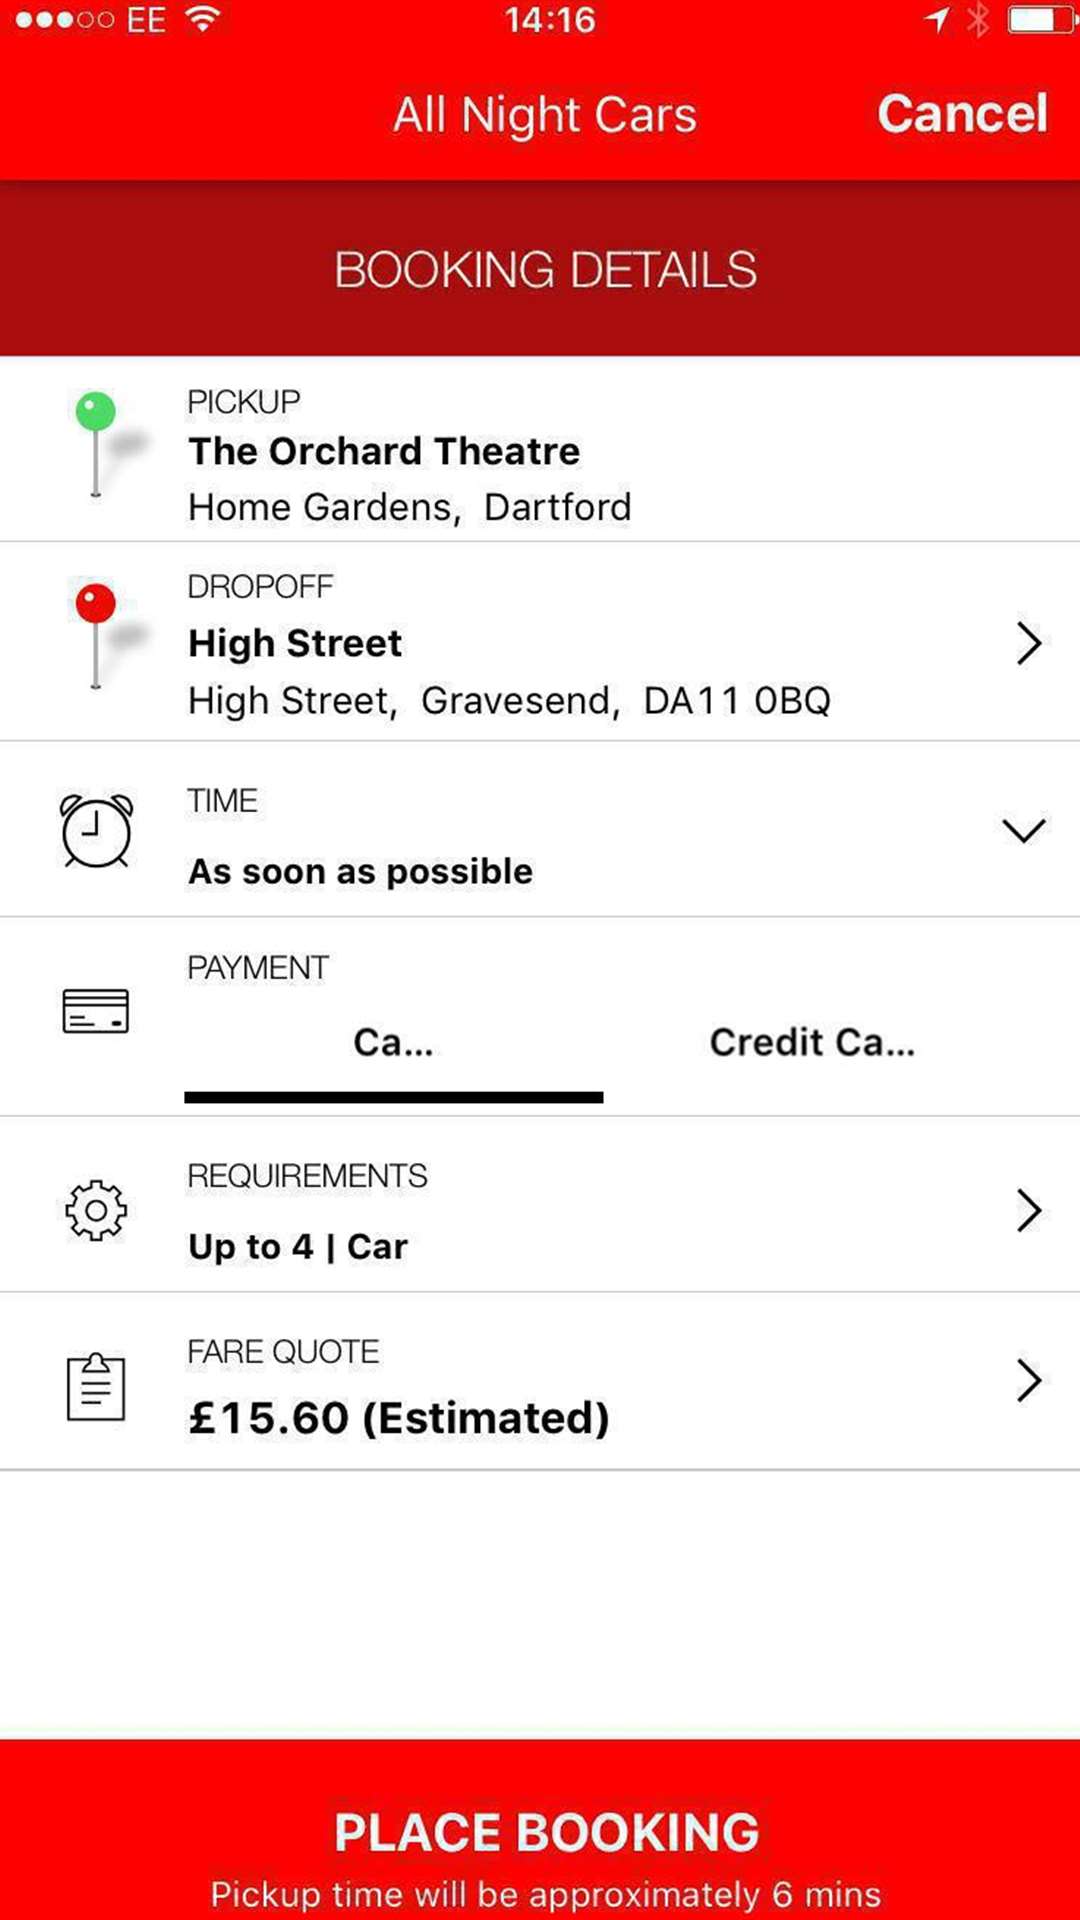 All Night Cars app in action, showing the quote price for a trip from Dartford to Gravesend